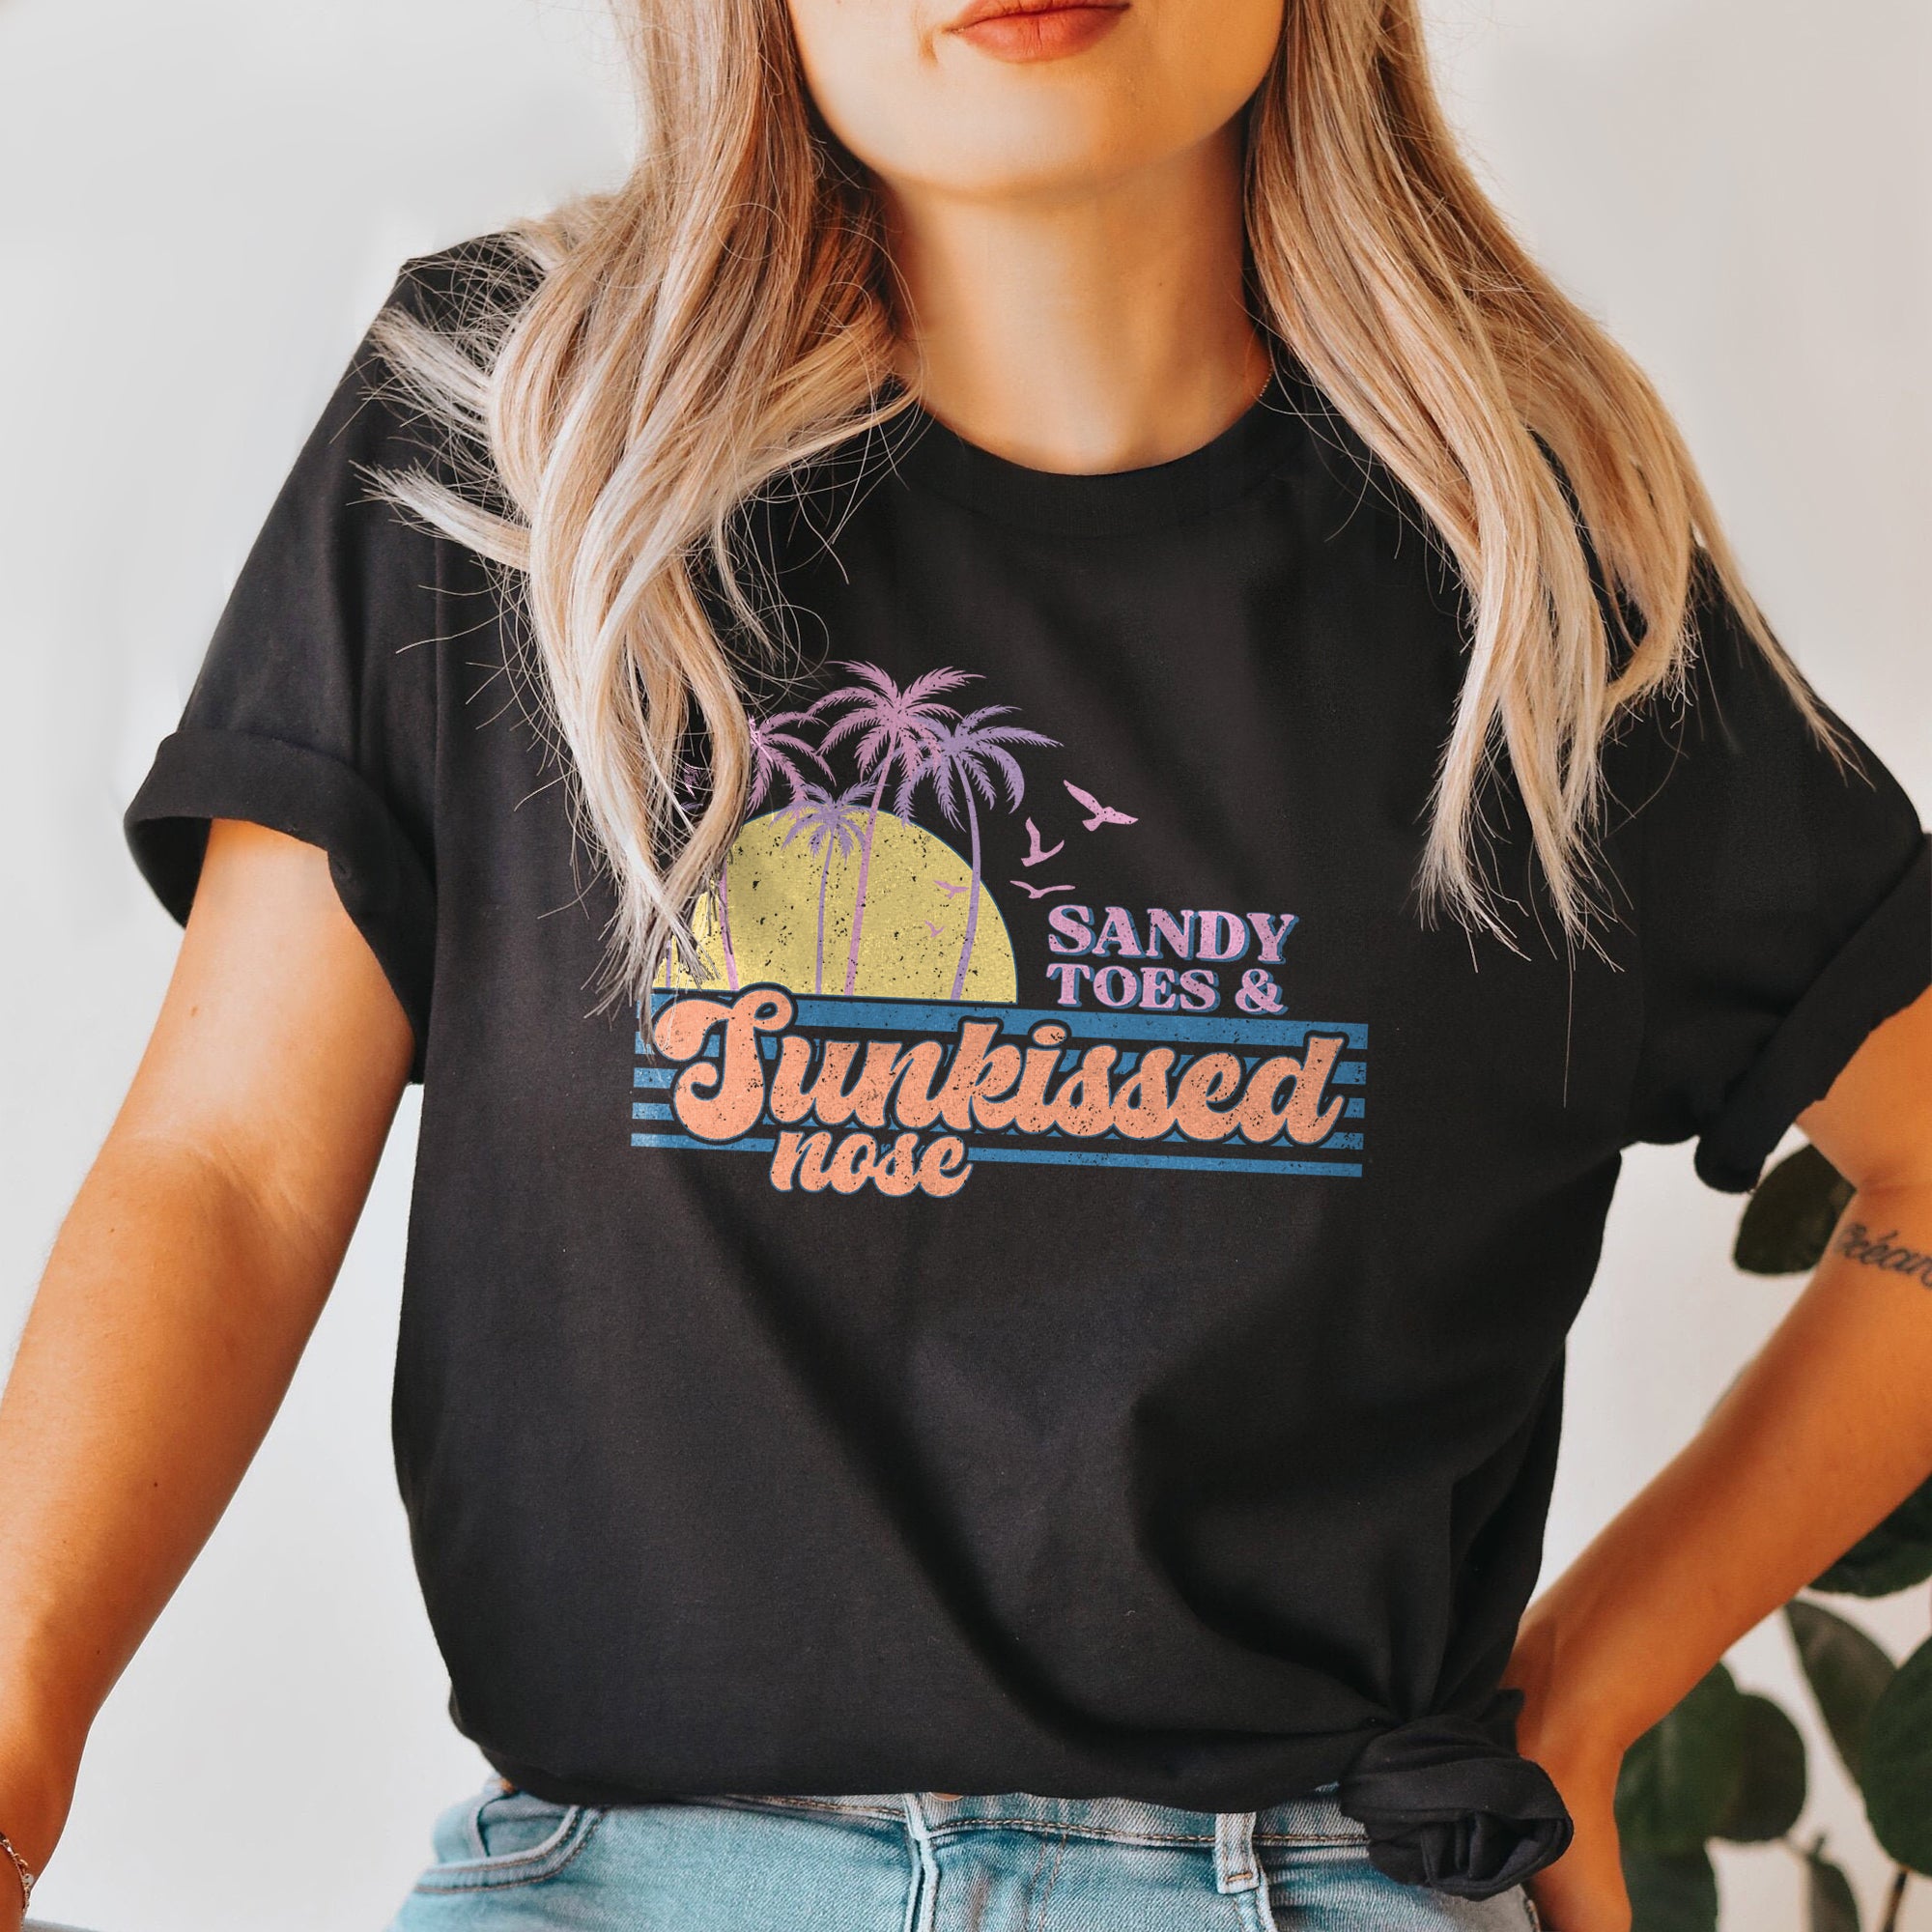 Sandy Toes & Sunkissed Nose Oversized Shirt for Women Garment-Dyed Graphic Tee